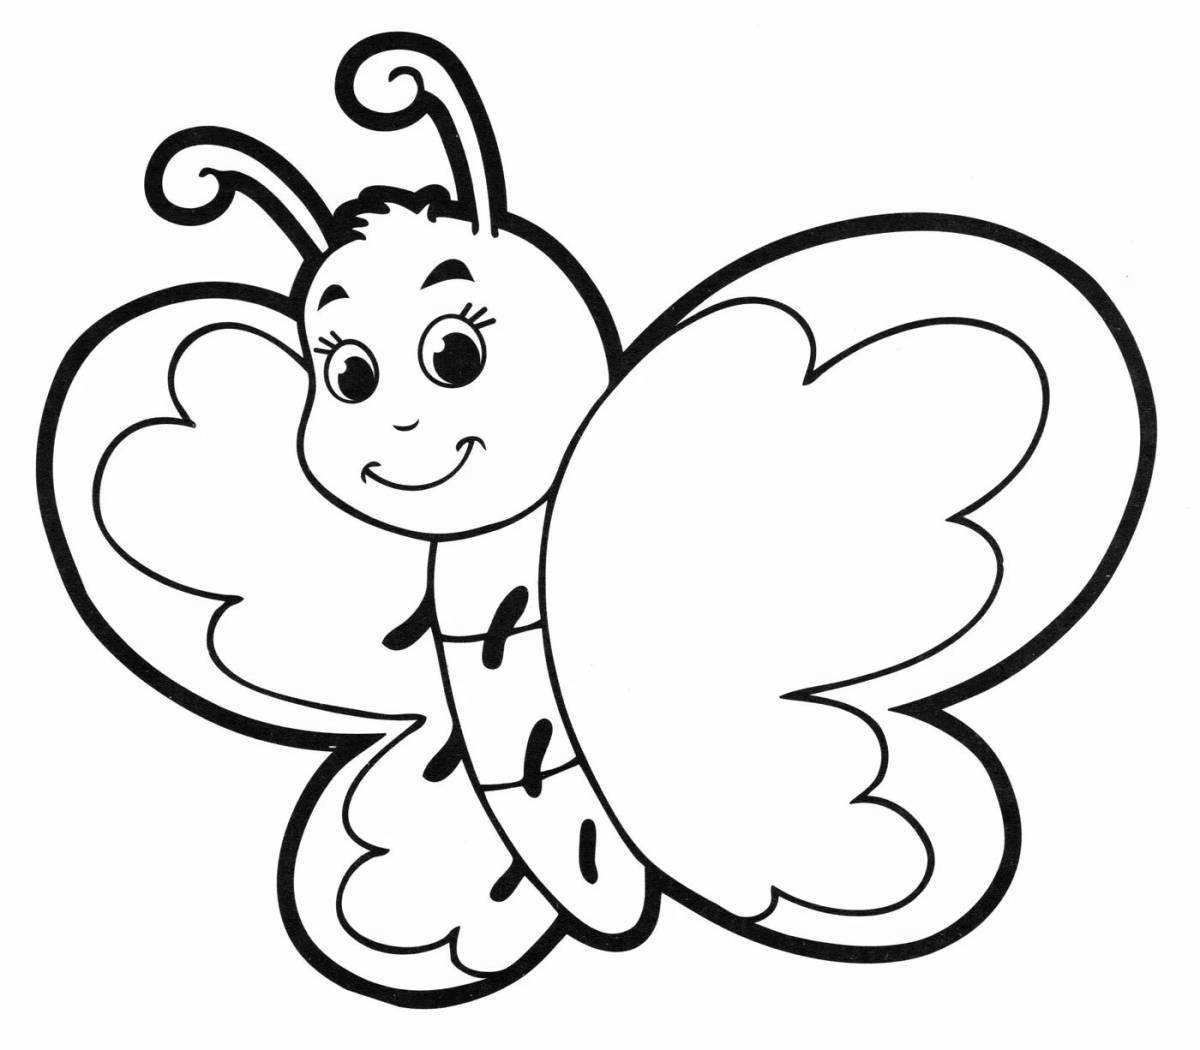 Playful butterfly coloring book for kids